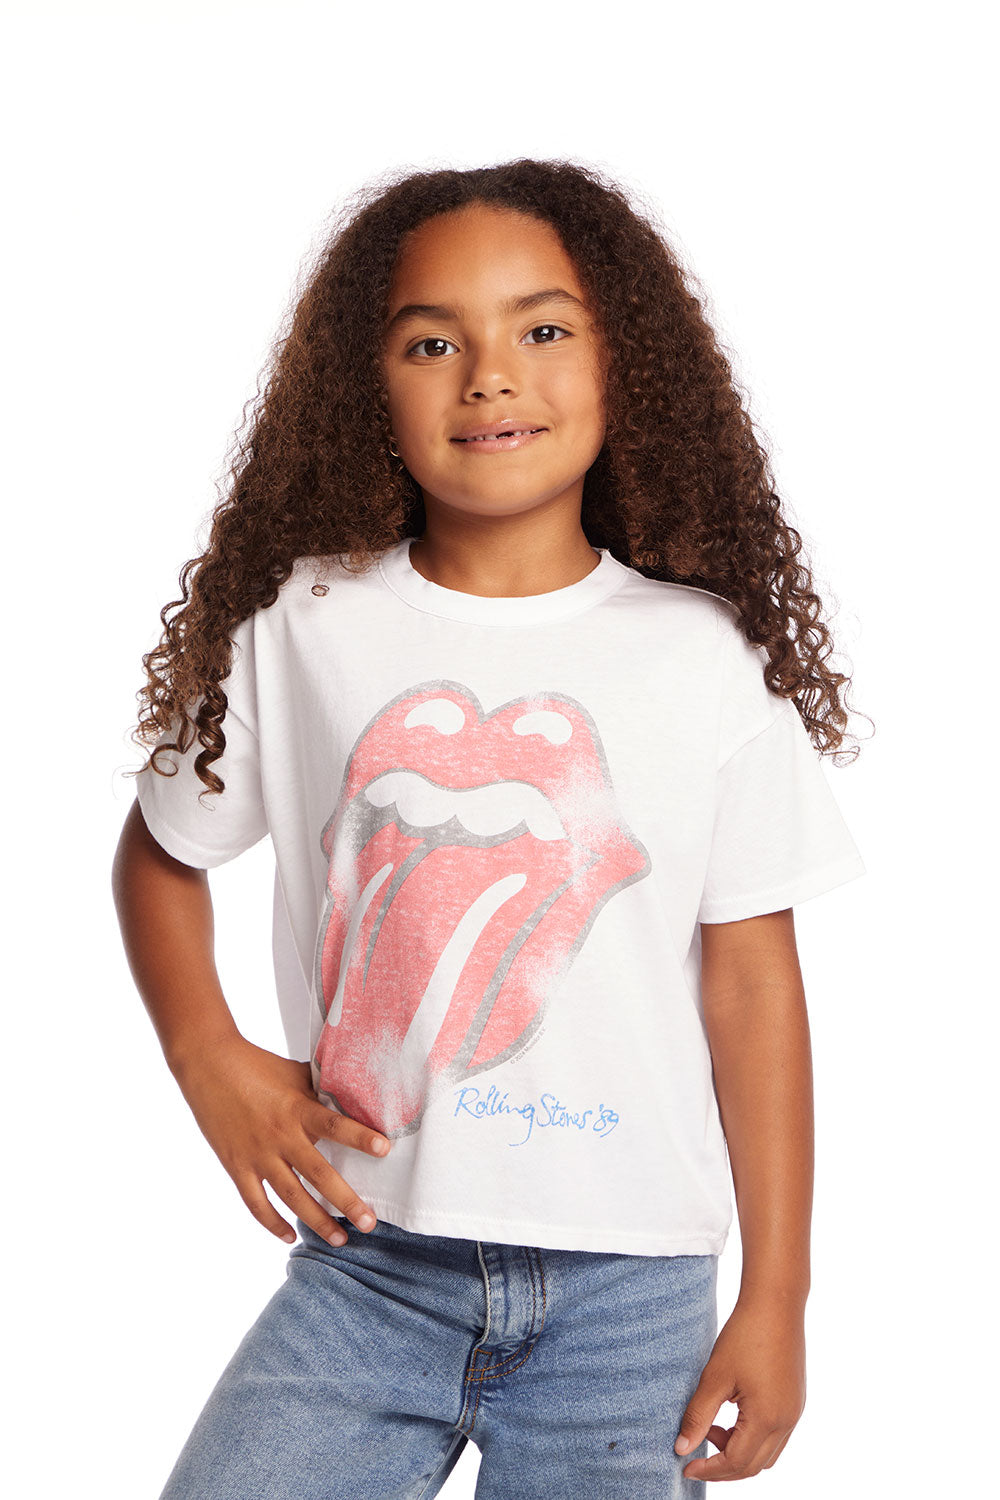 Rolling Stones Classic Logo Girls Tee GIRLS chaserbrand